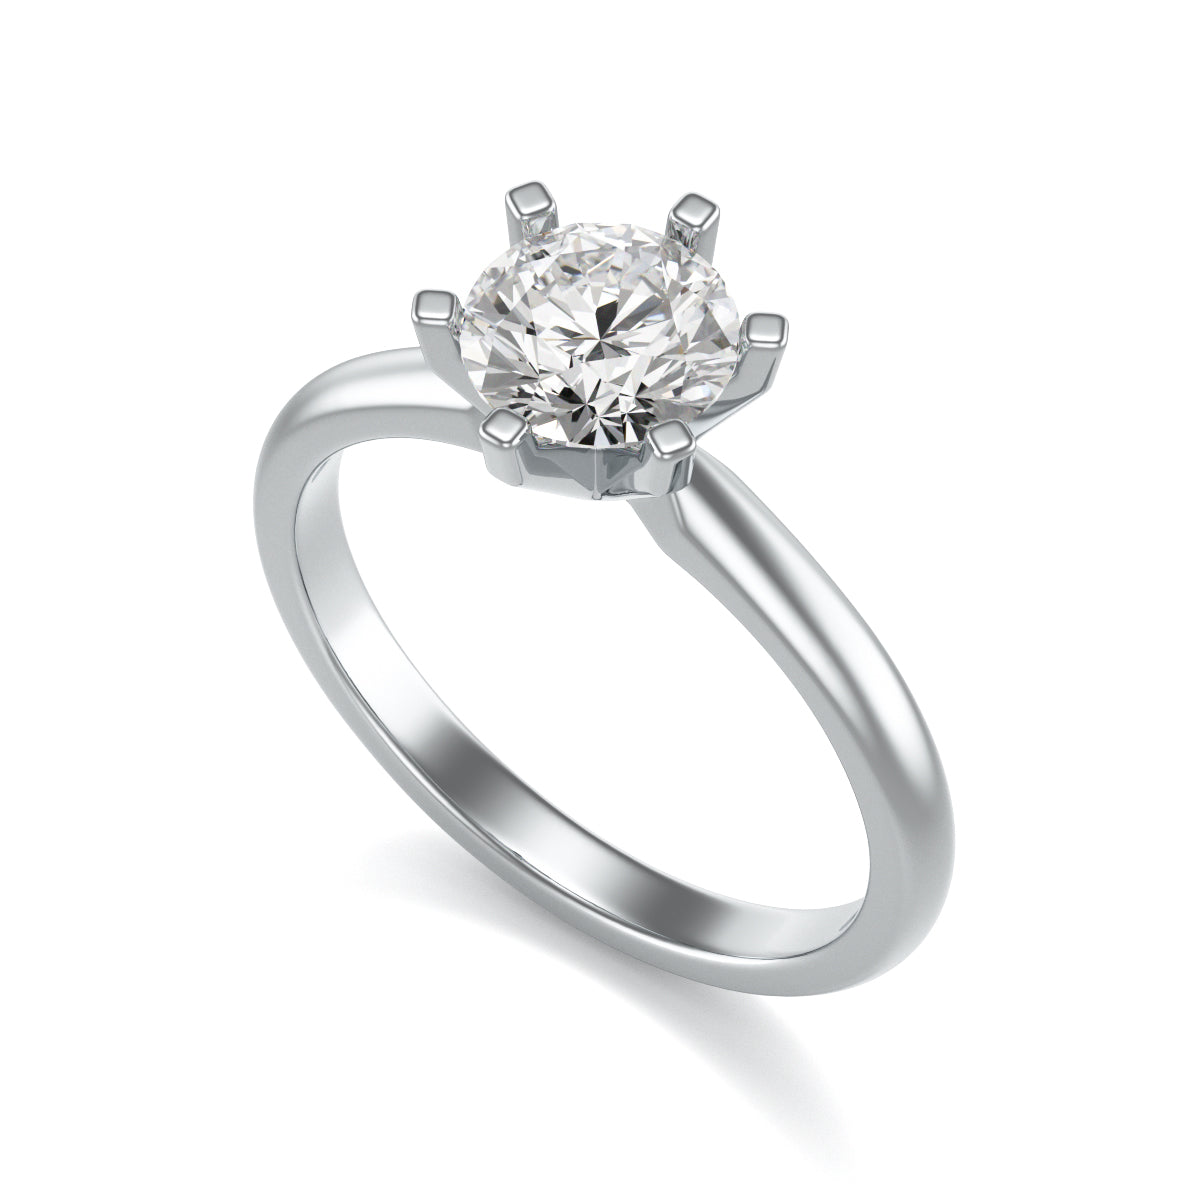 Round Brilliant Cut Centre Stone, Six Claw, Tapered Shank, Diamond Engagement Ring